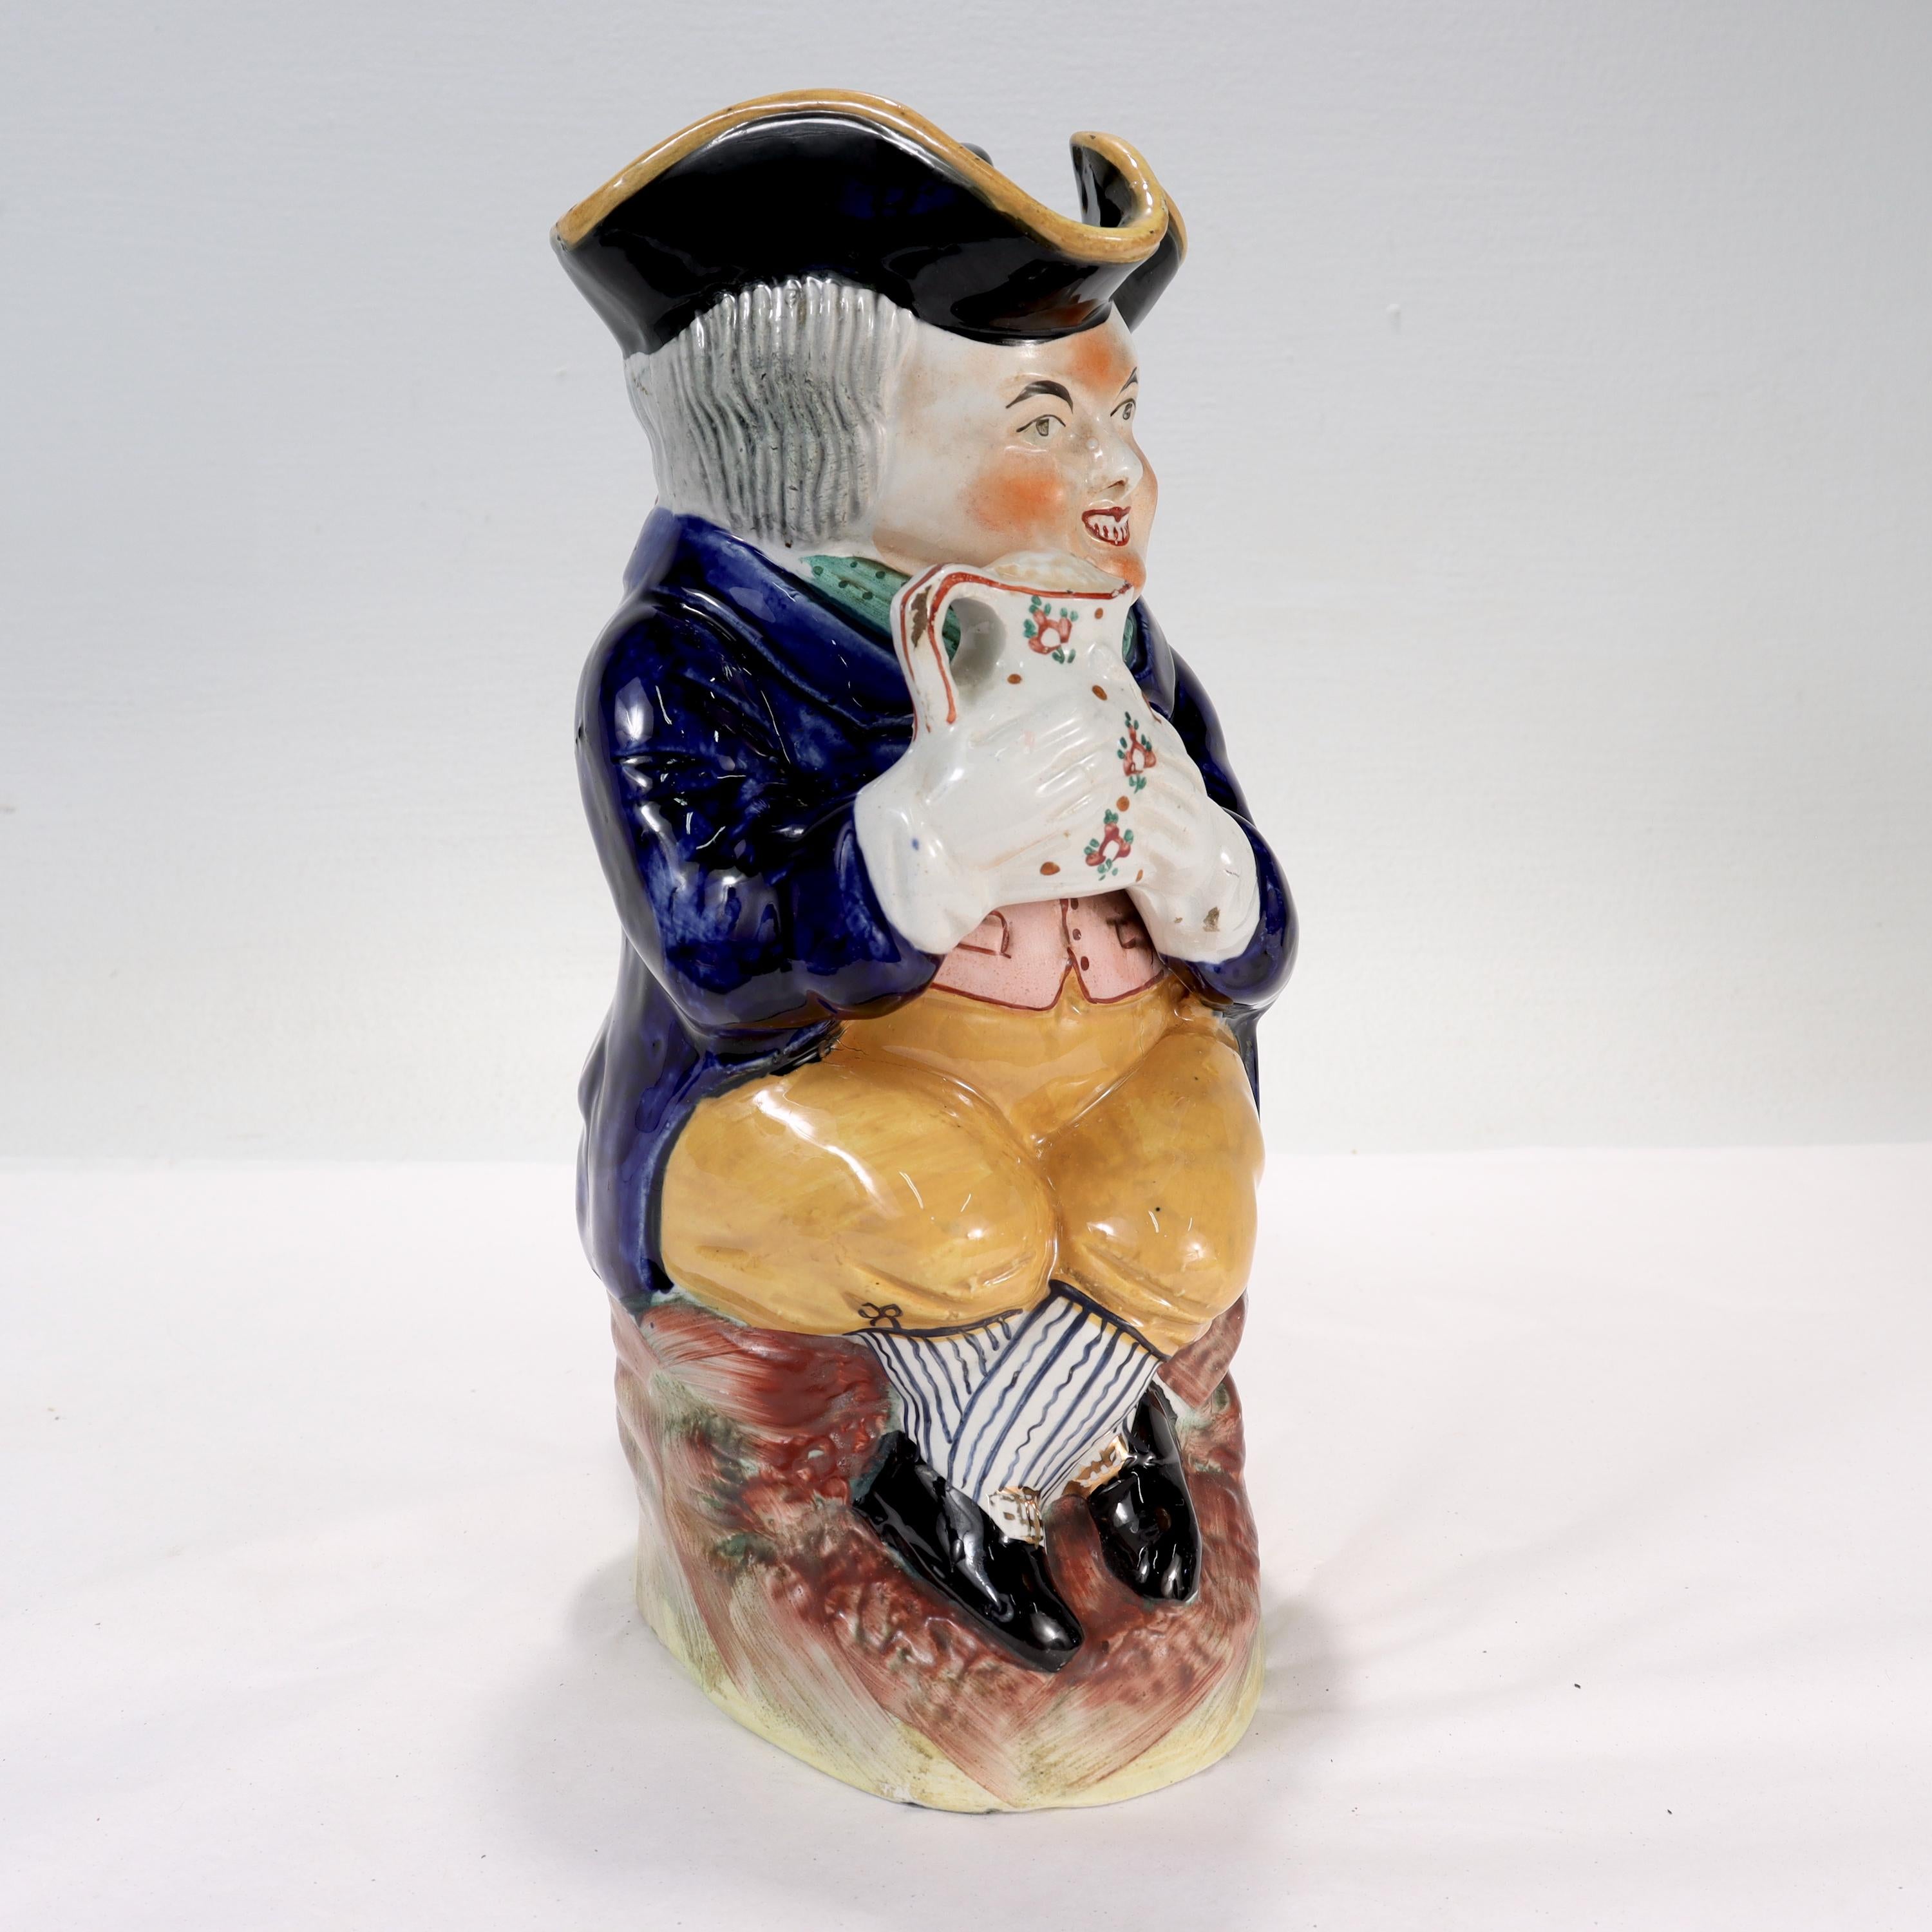 A fine antique Staffordshire pottery Toby Jug.

In the form of a seated, smiling man holding a jug.

The man's tricorn hat serves as a lid, and an integral handle runs down his back.

Simply a great Toby Jug!

Date:
19th Century

Overall